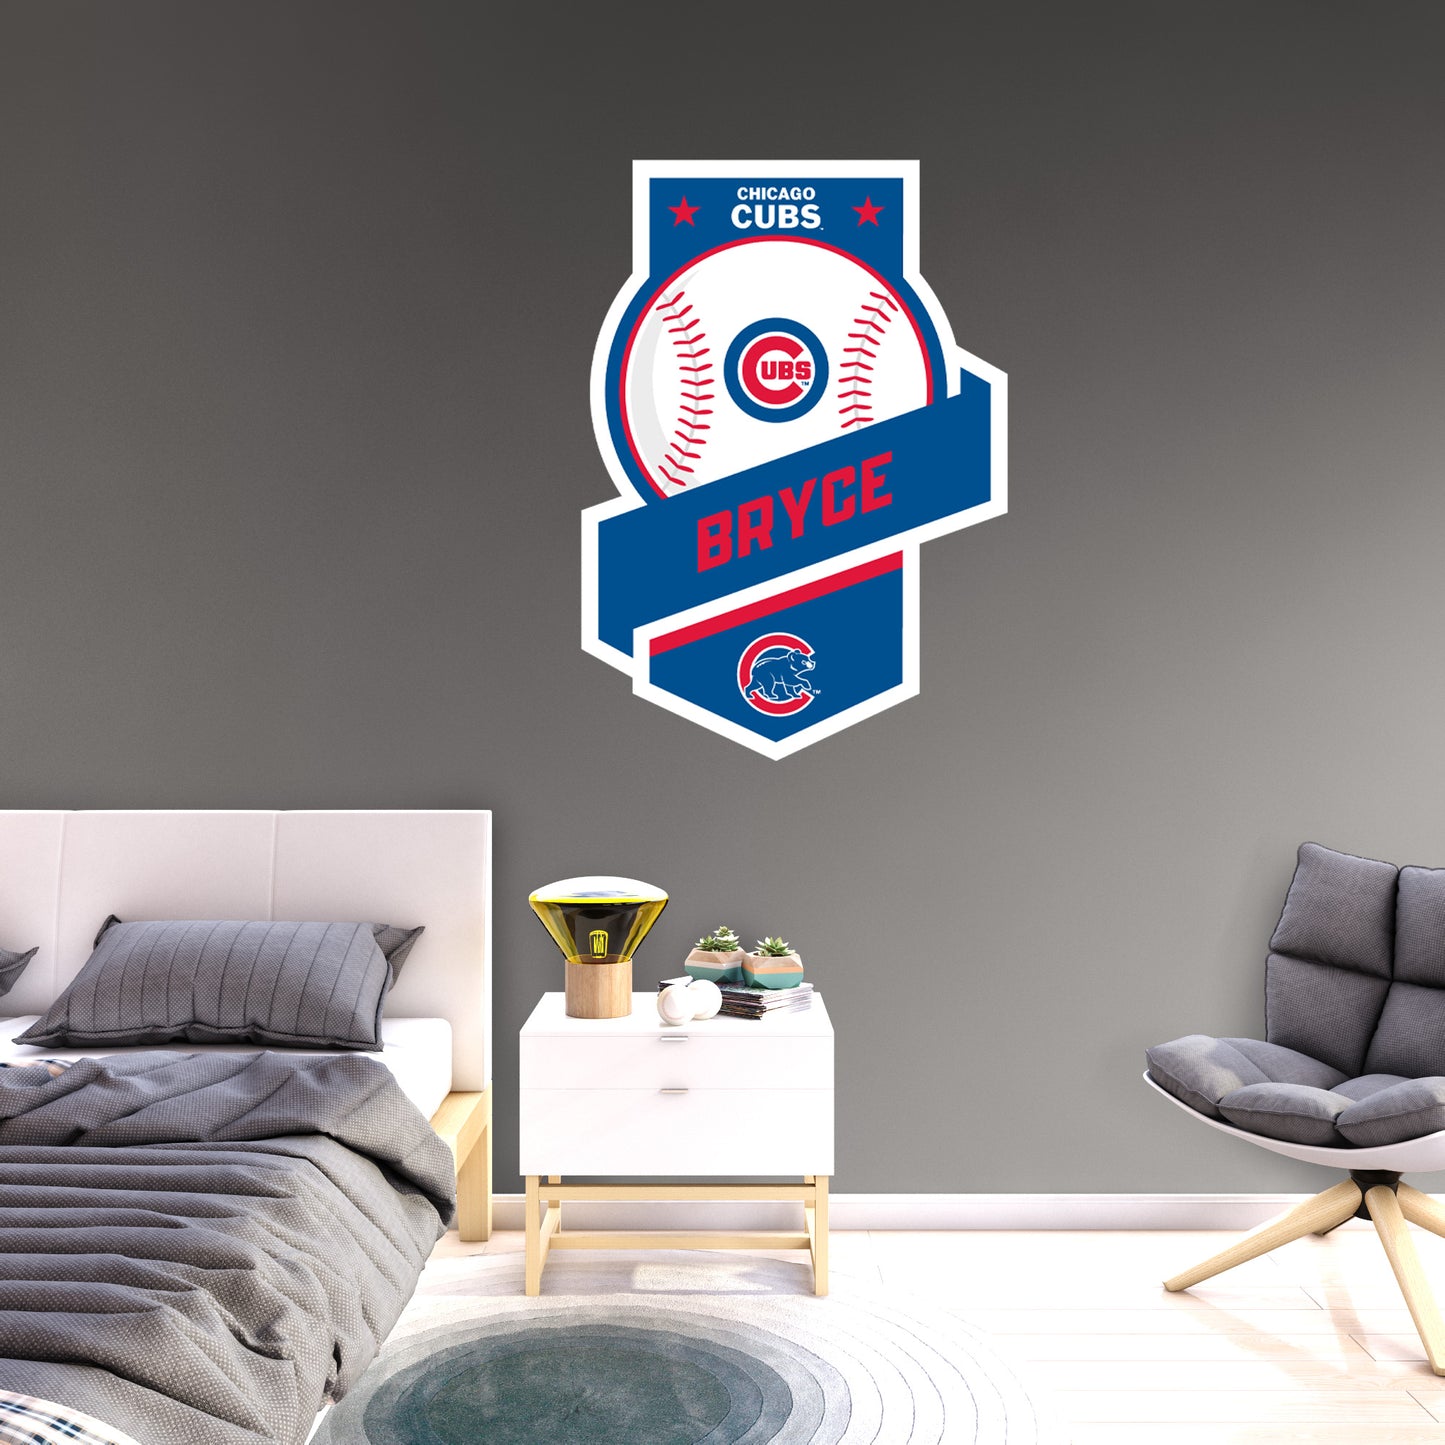 Fathead Chicago Cubs Giant Removable Wall Mural